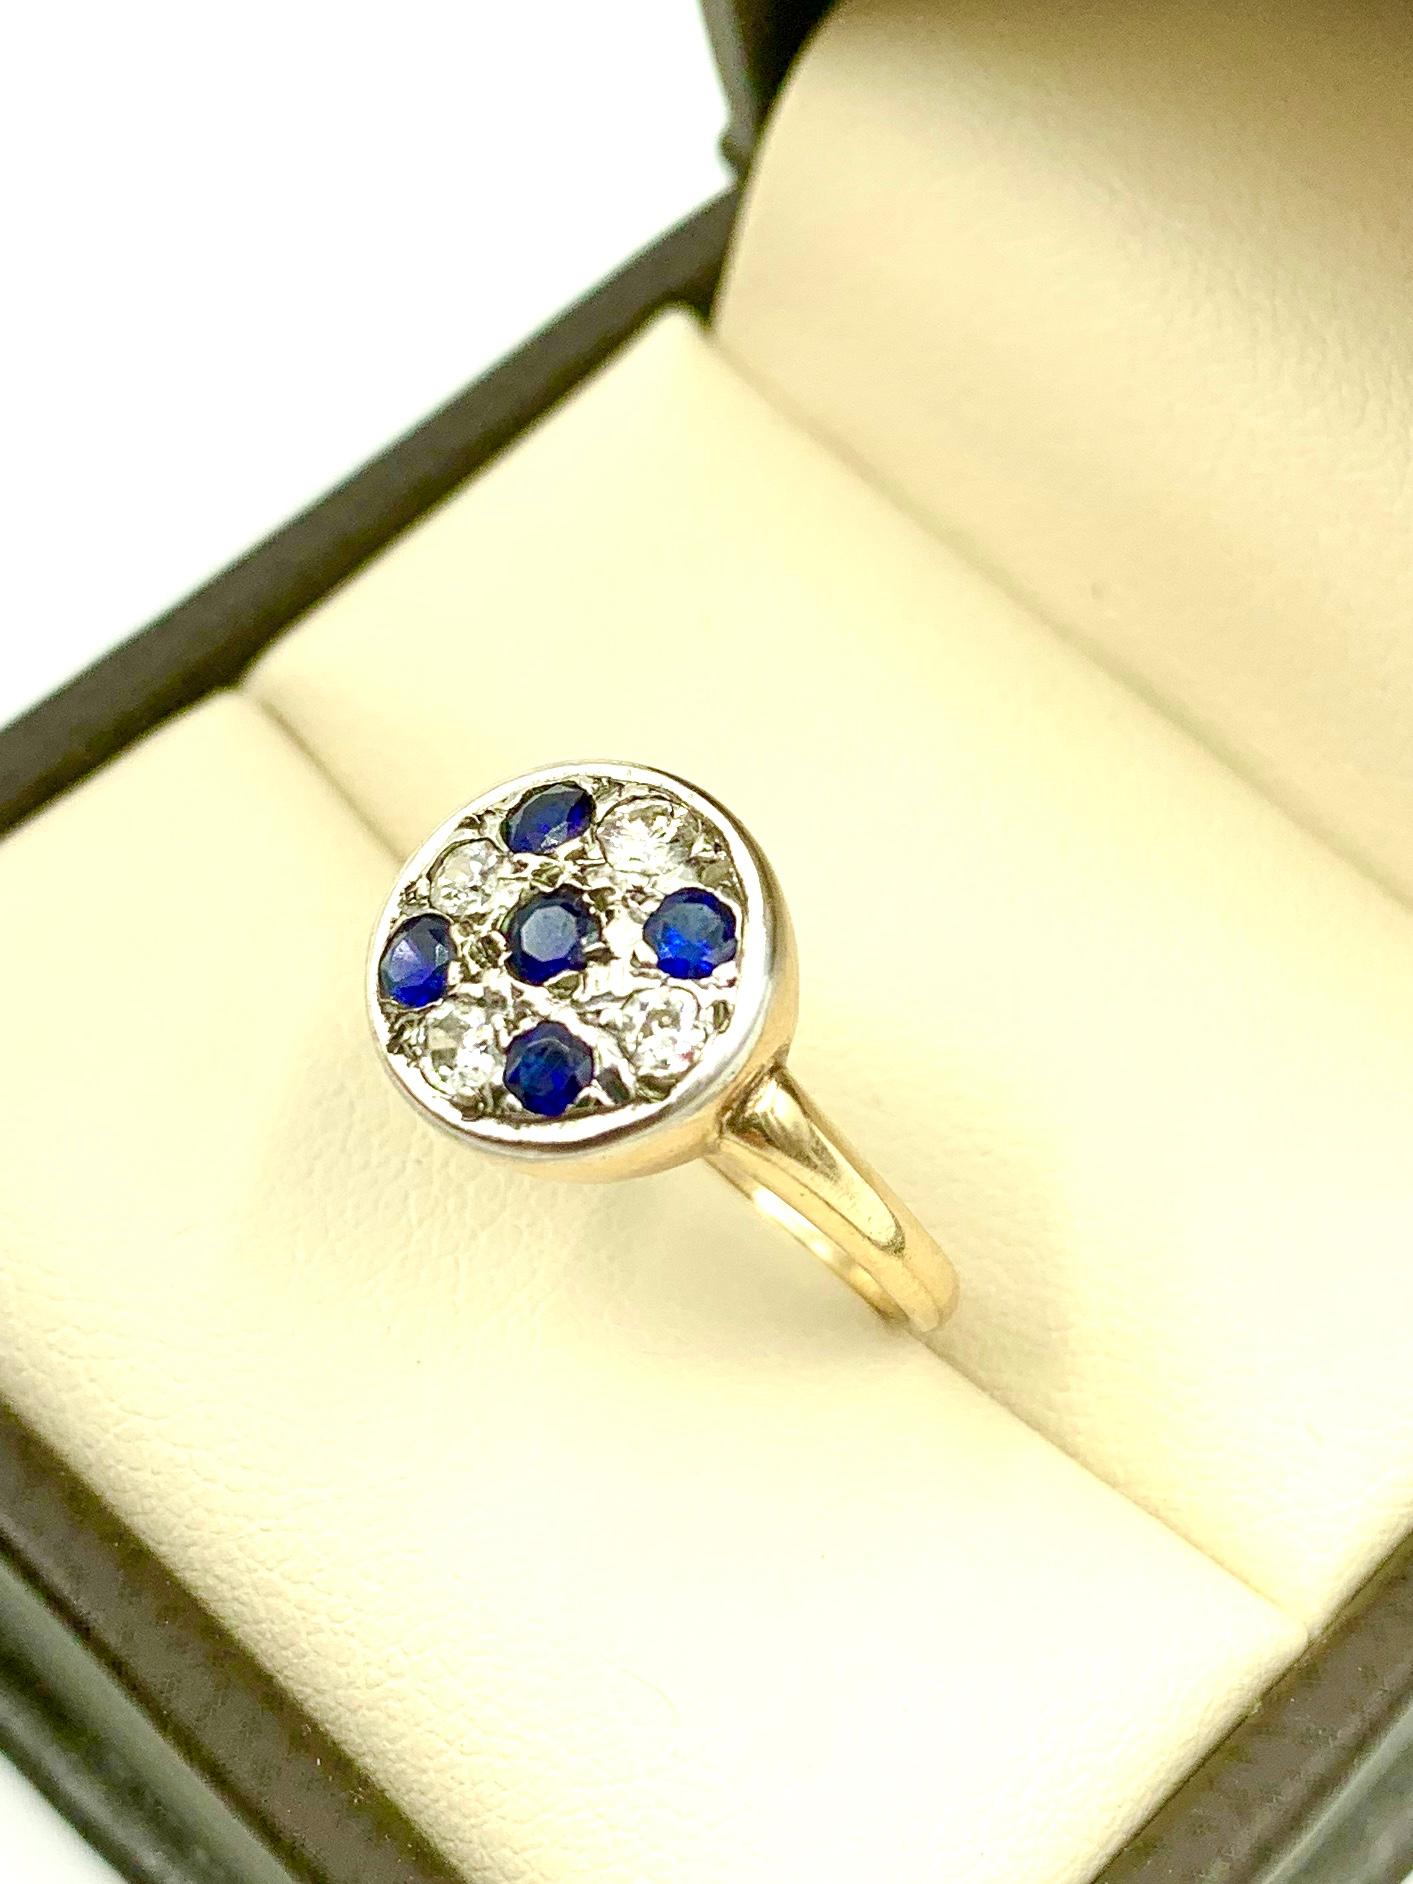 Beautiful Art Deco period diamond and sapphire Circle ring composed of four diamonds and five blue sapphires set in platinum and 14K yellow gold. 
Fine quality, lovely design with the sapphires forming a cross within the circle. The circle is widely